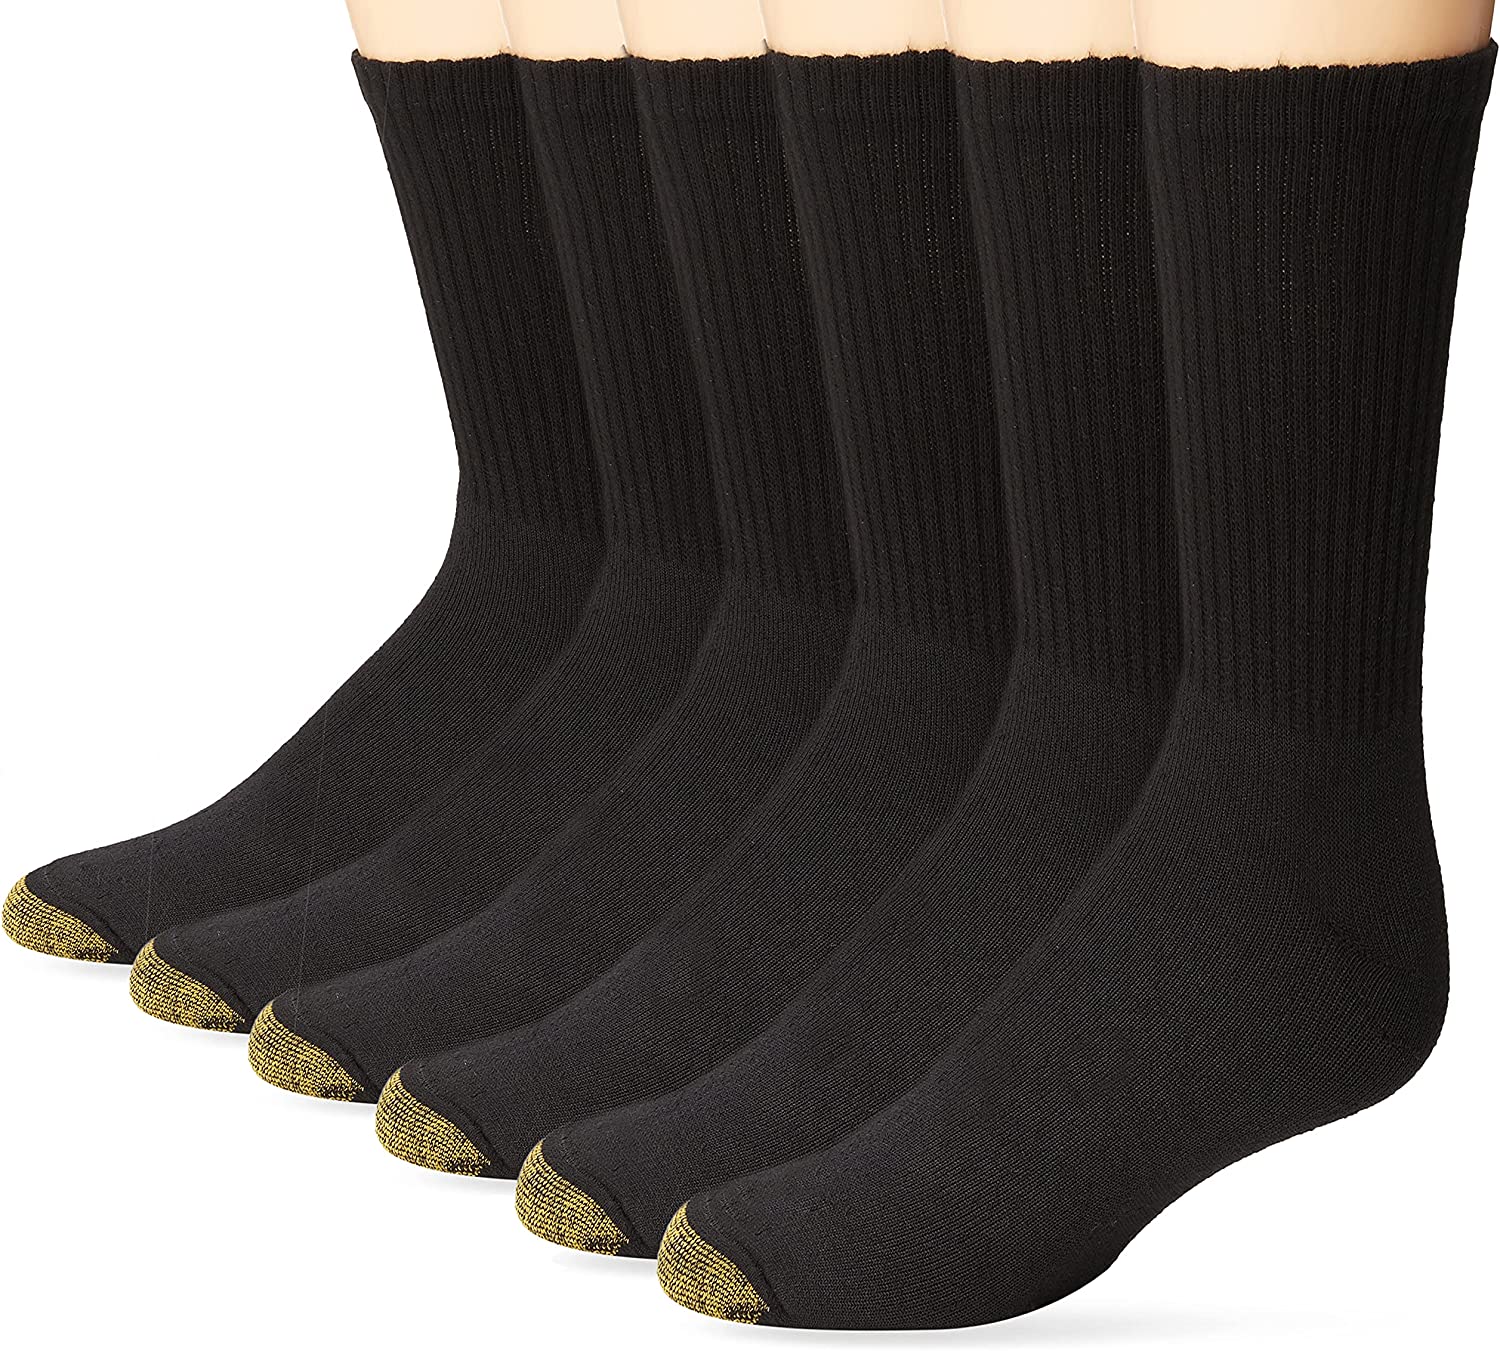 6-Pairs Gold Toe Men's Cotton Short Crew Athletic Socks (Black or White) $13.20 + Free Shipping w/ Prime or on $35+